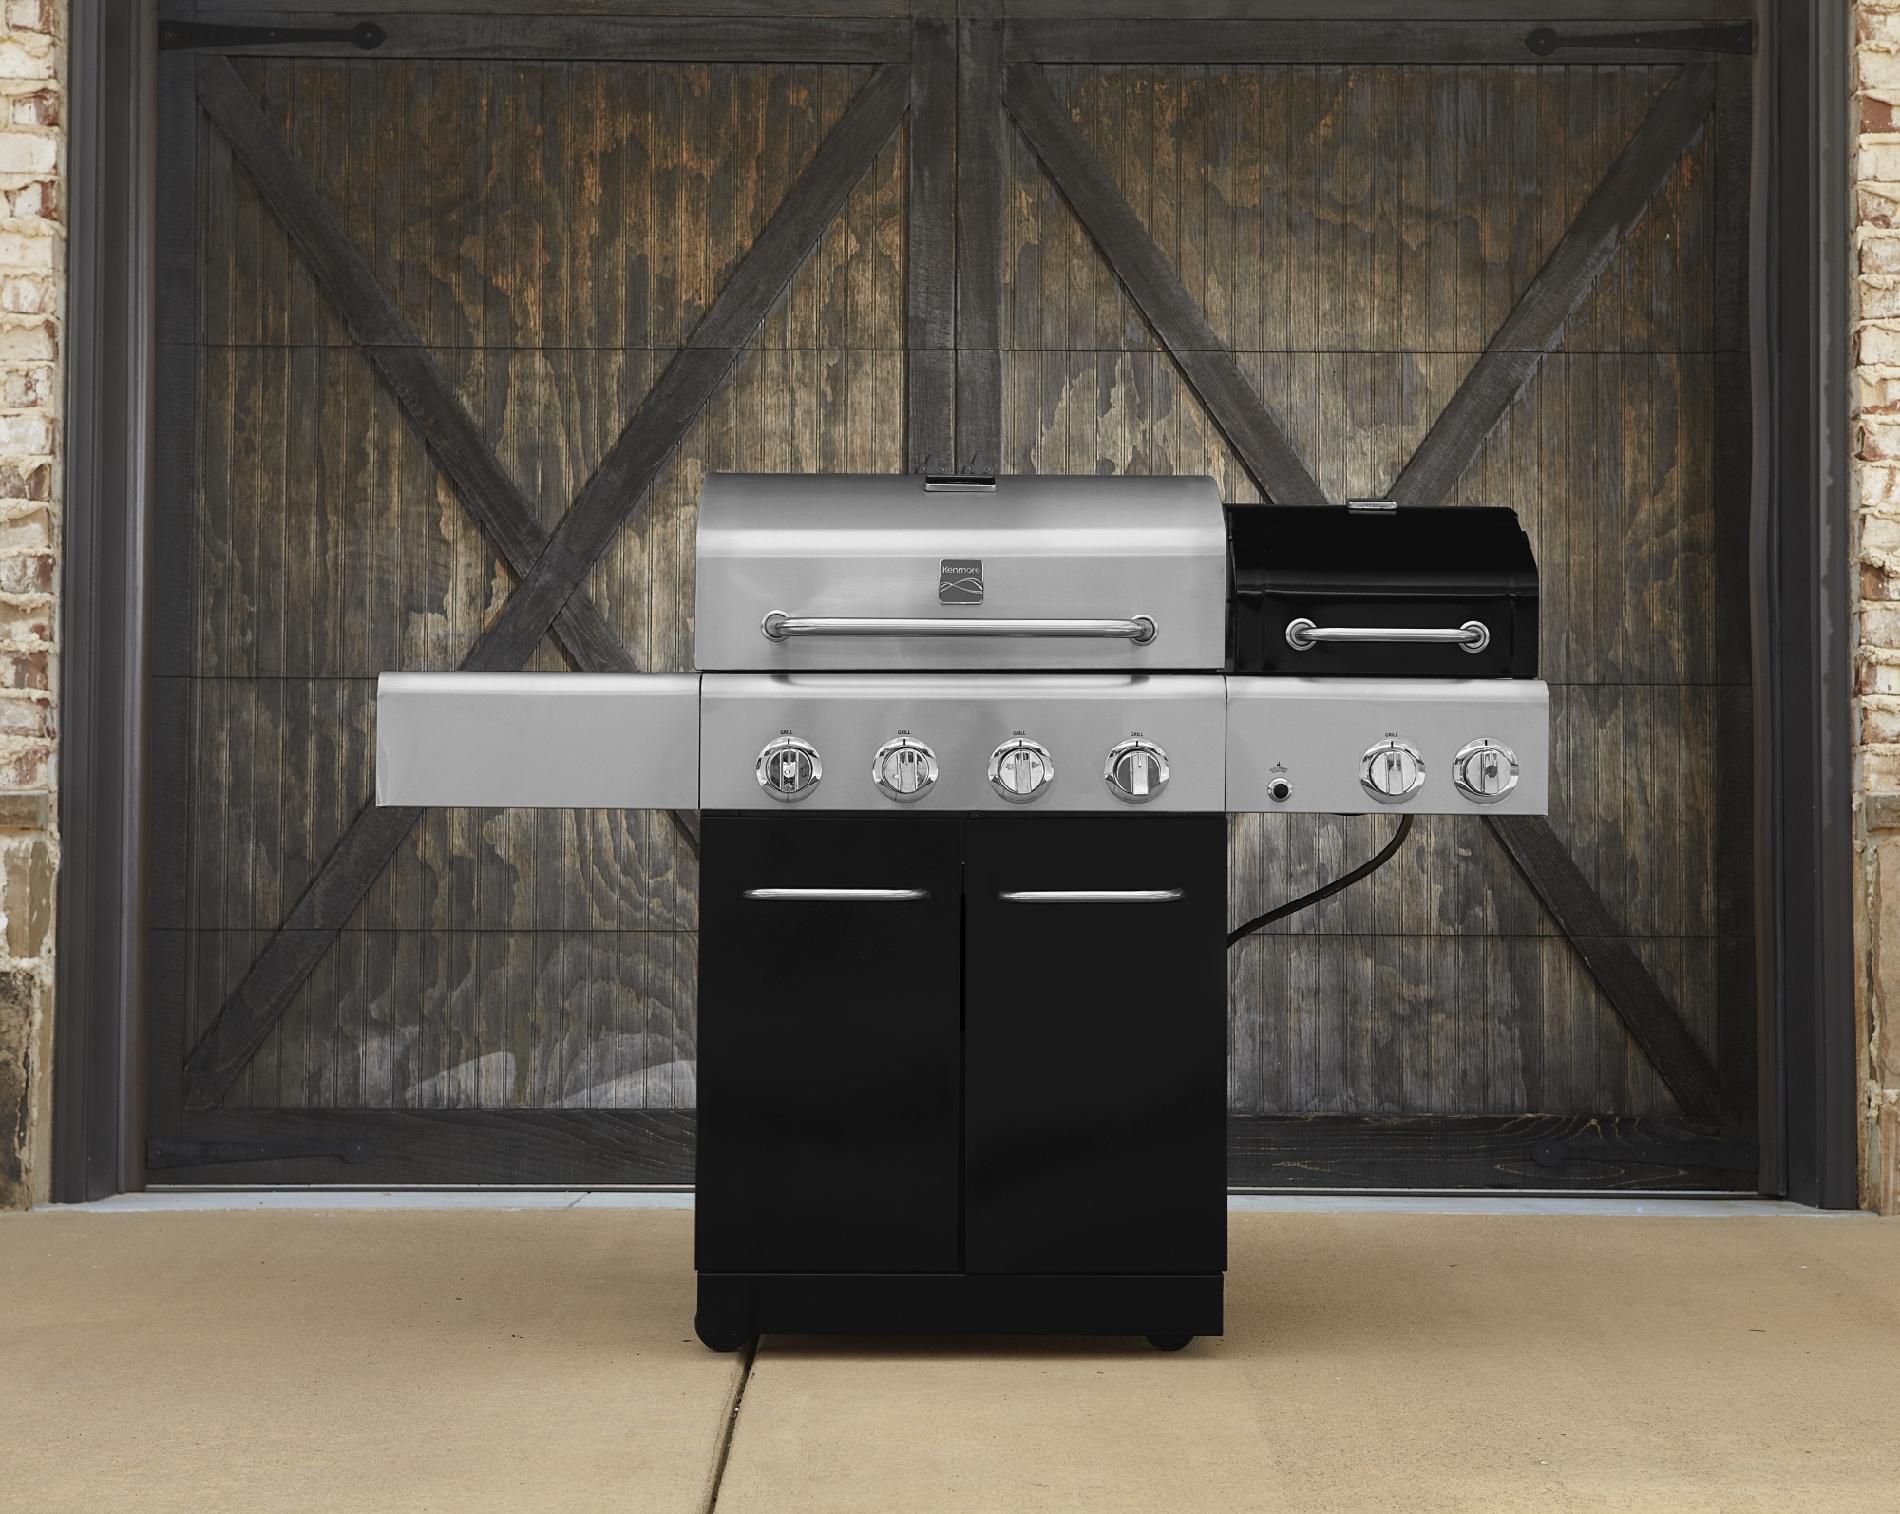 Kenmore 4 Burner Gas Grill with Oven